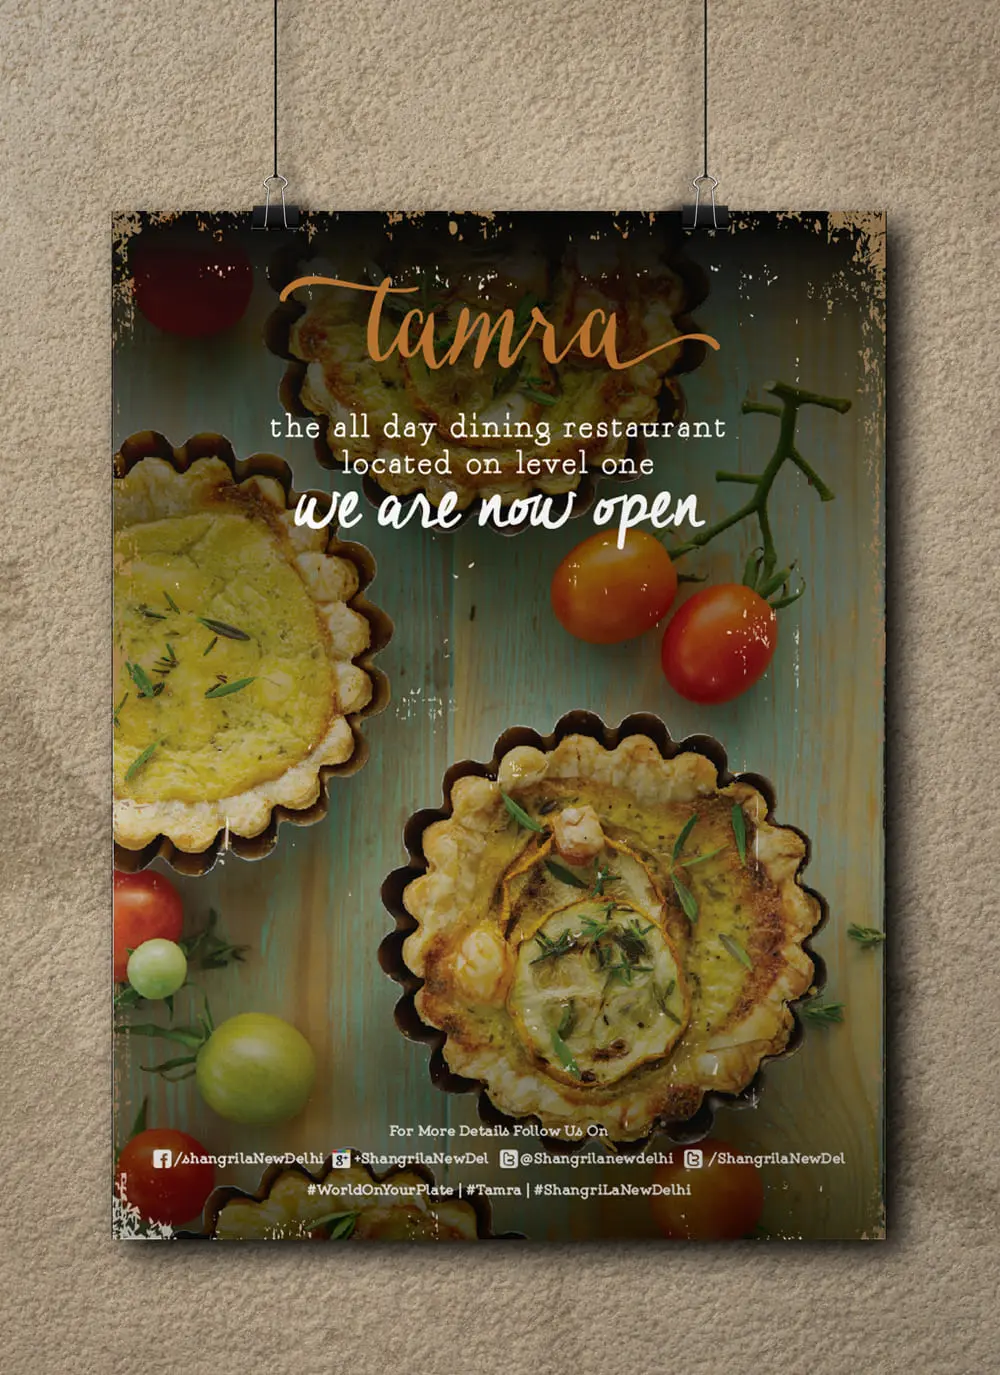 A poster for a restaurant with pies on it.